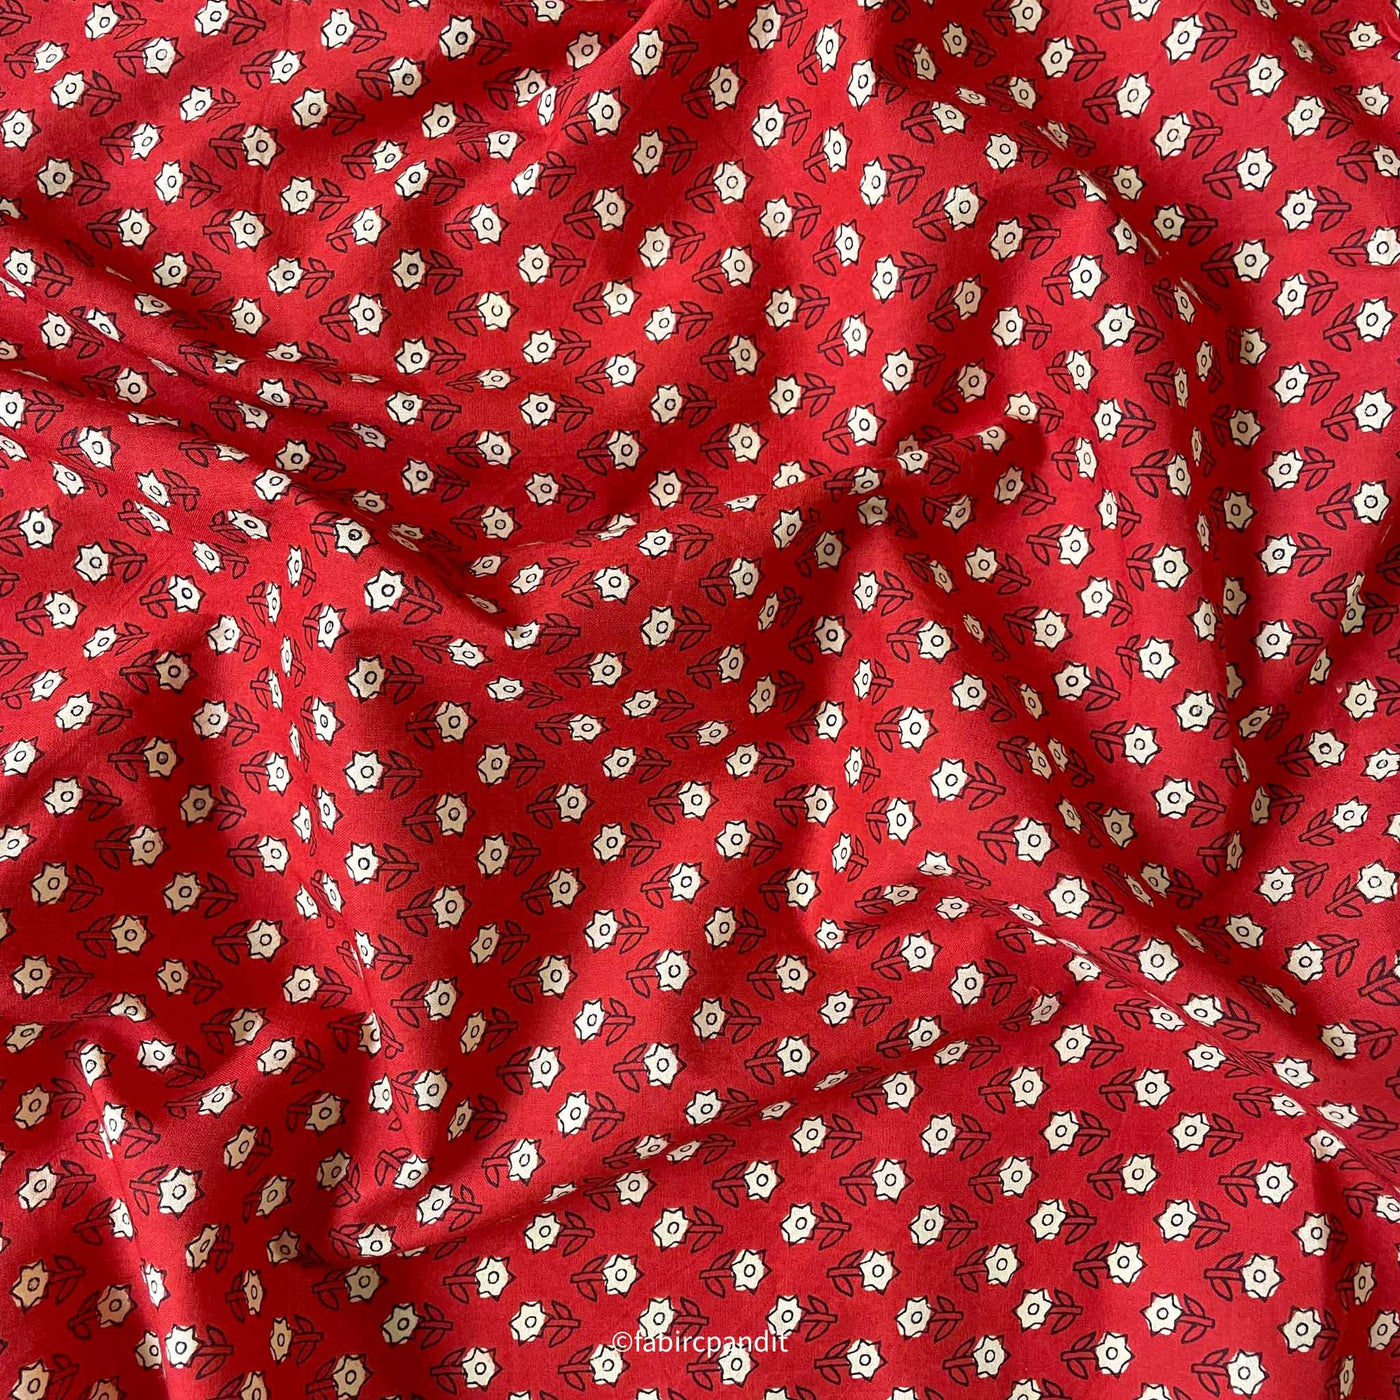 Fabric Pandit Cut Piece (CUT PIECE) Red and White Geometric Floral Hand Block Printed Pure Cotton Fabric (Width 43 inches)